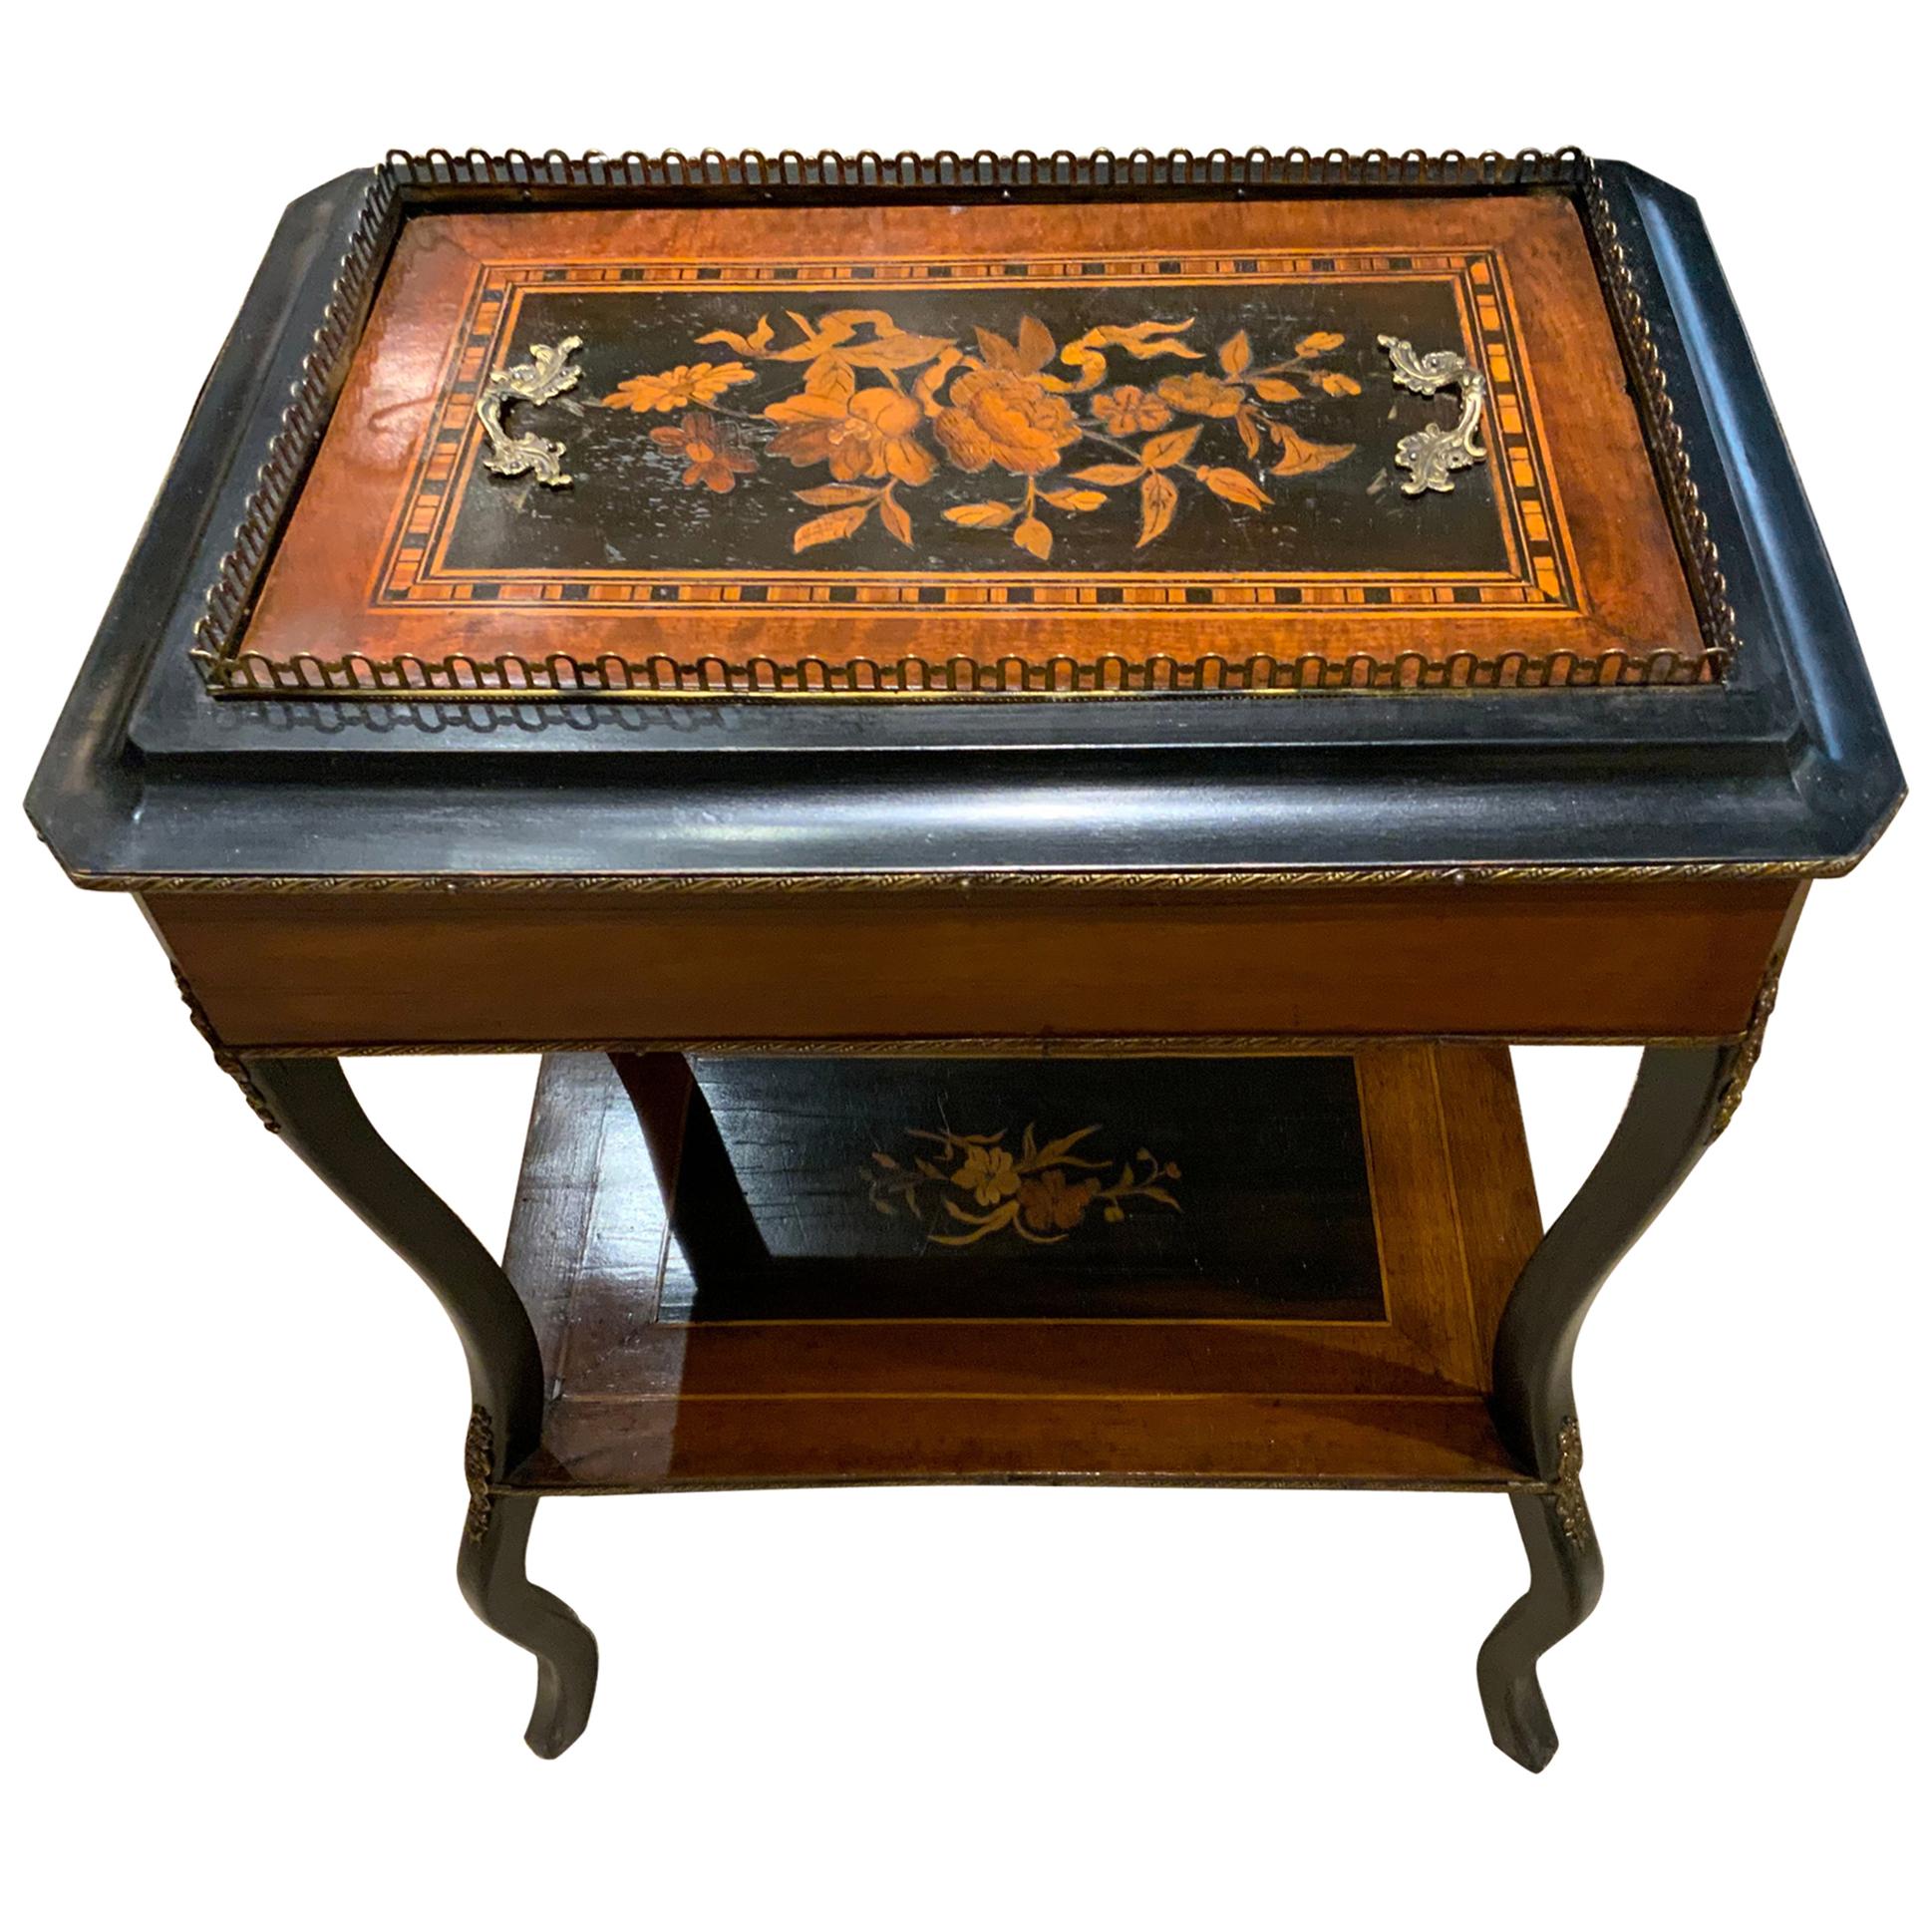 French Table Napoleon III, 19th Century Rosewood and Ebony Marquetry Inlay